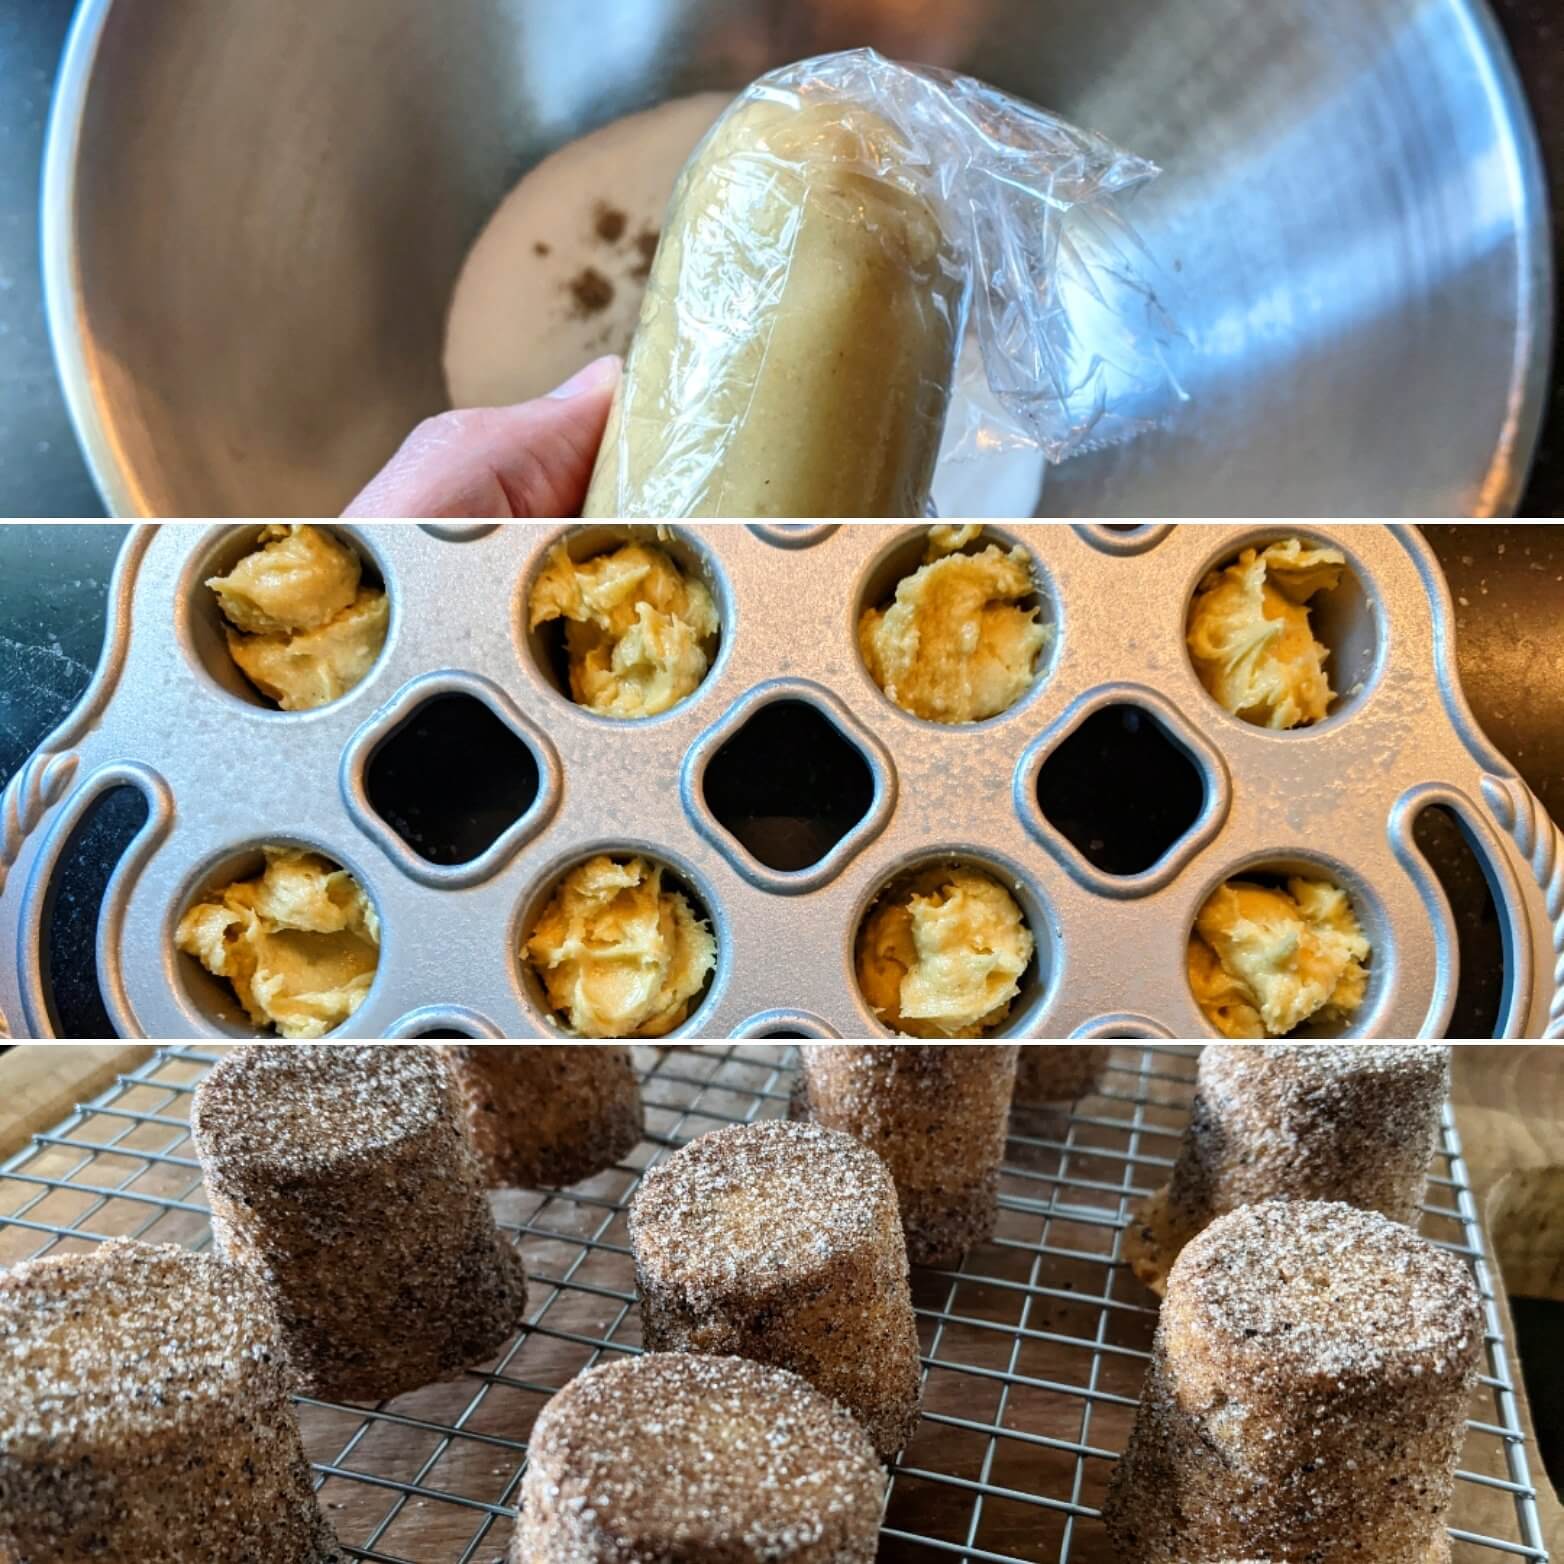 Three images. A hand holding a log of fresh marzipan wrapped in cling wrap. A petite popover pan filled with fresh dough. A cooling rack with narrow cylinders of cake rolled in cardamom sugar.